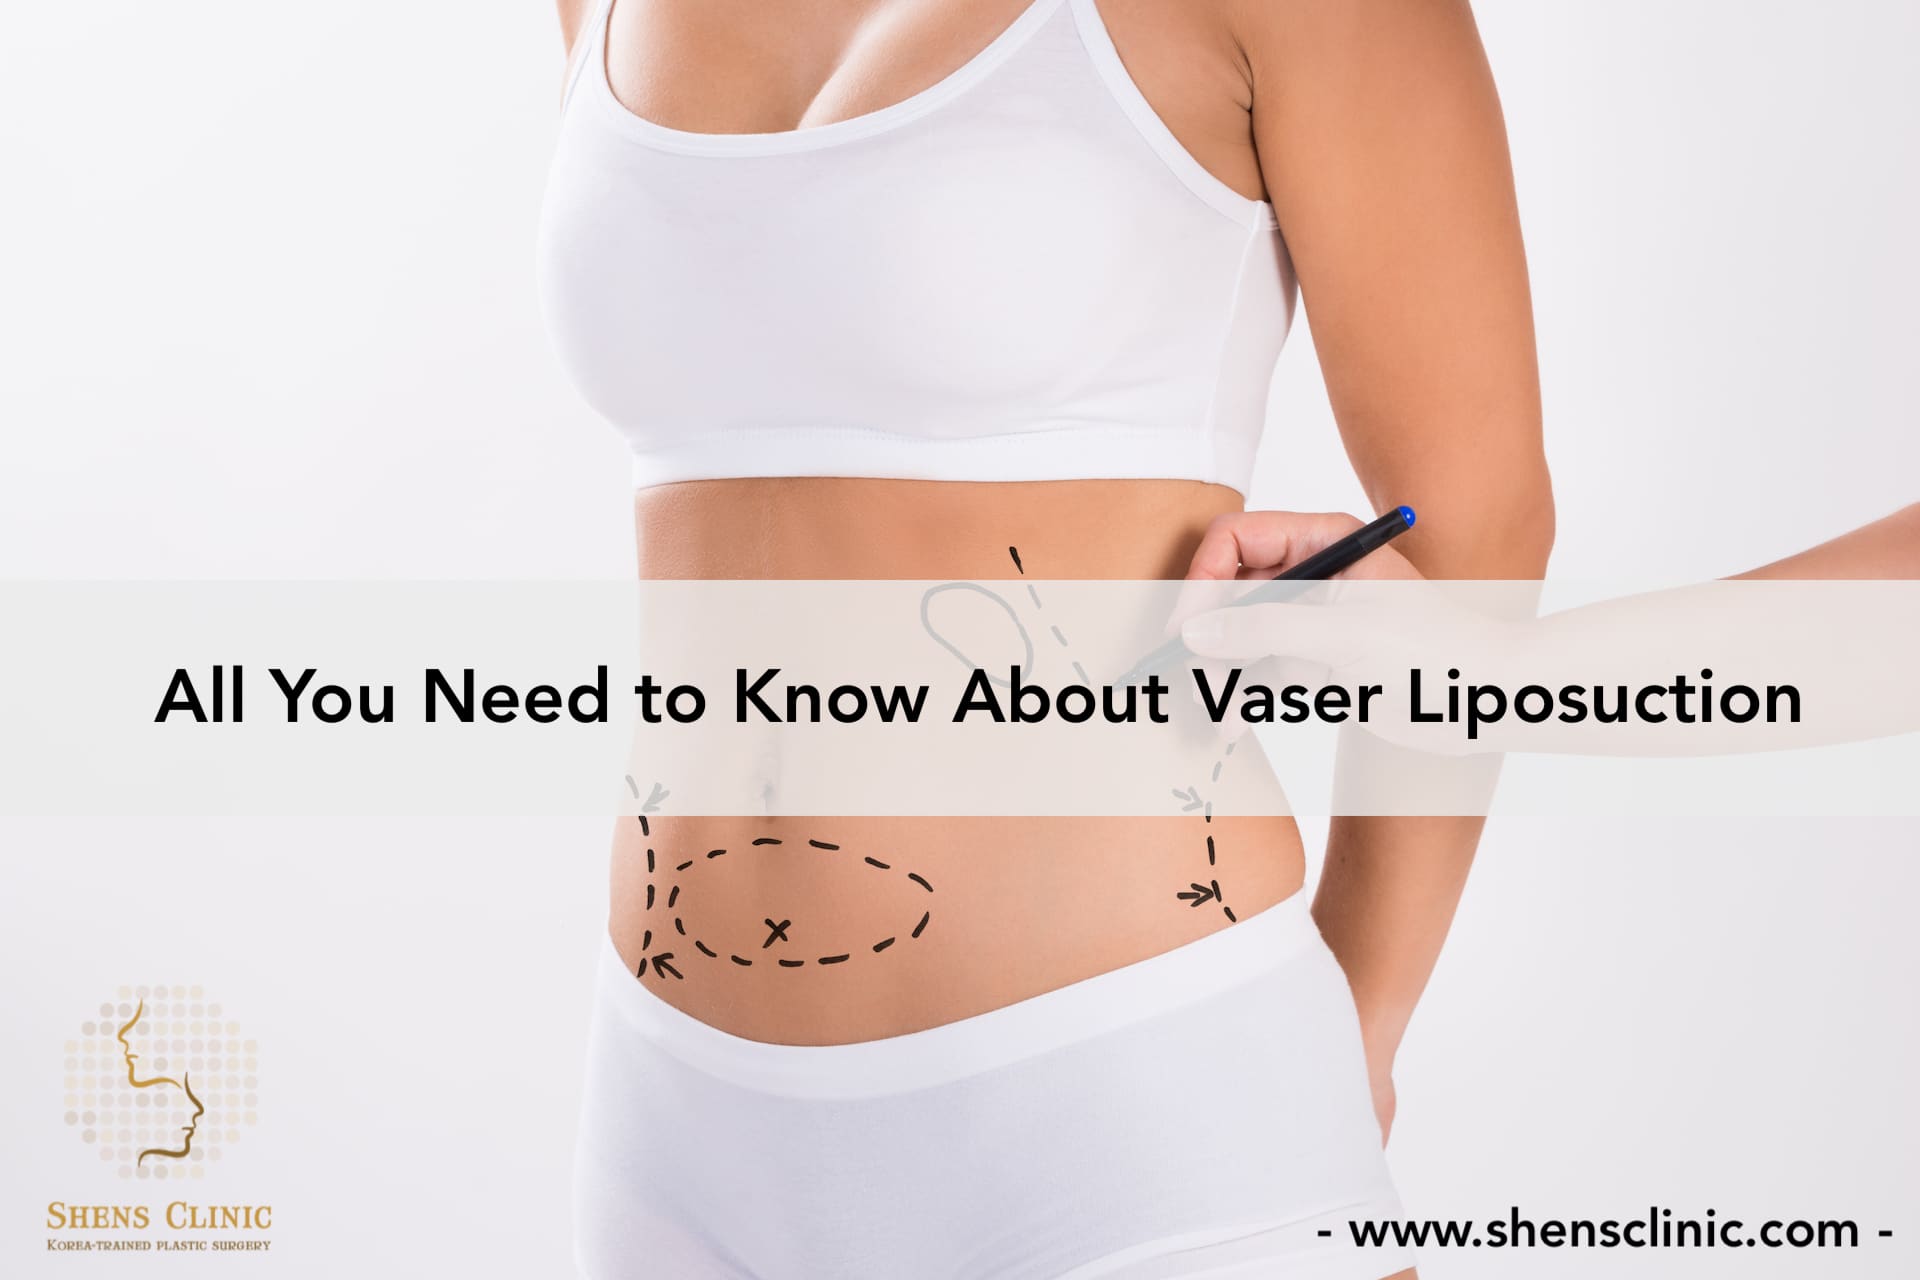 All You Need to Know About Vaser Liposuction